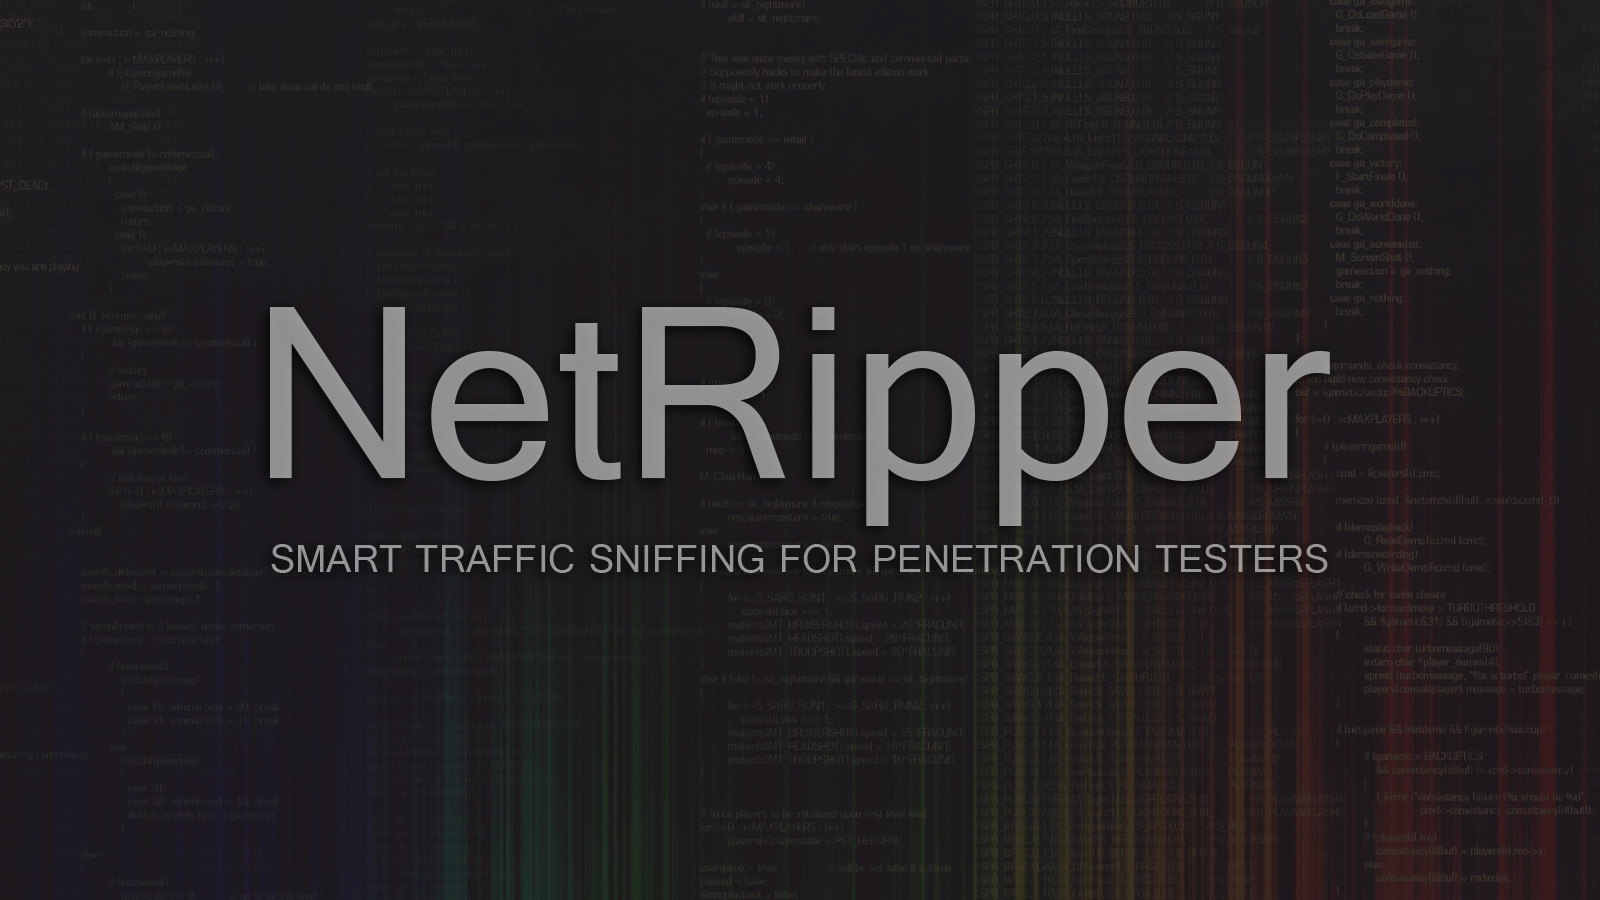 NetRipper - Smart Traffic Sniffing for Penetration Testers